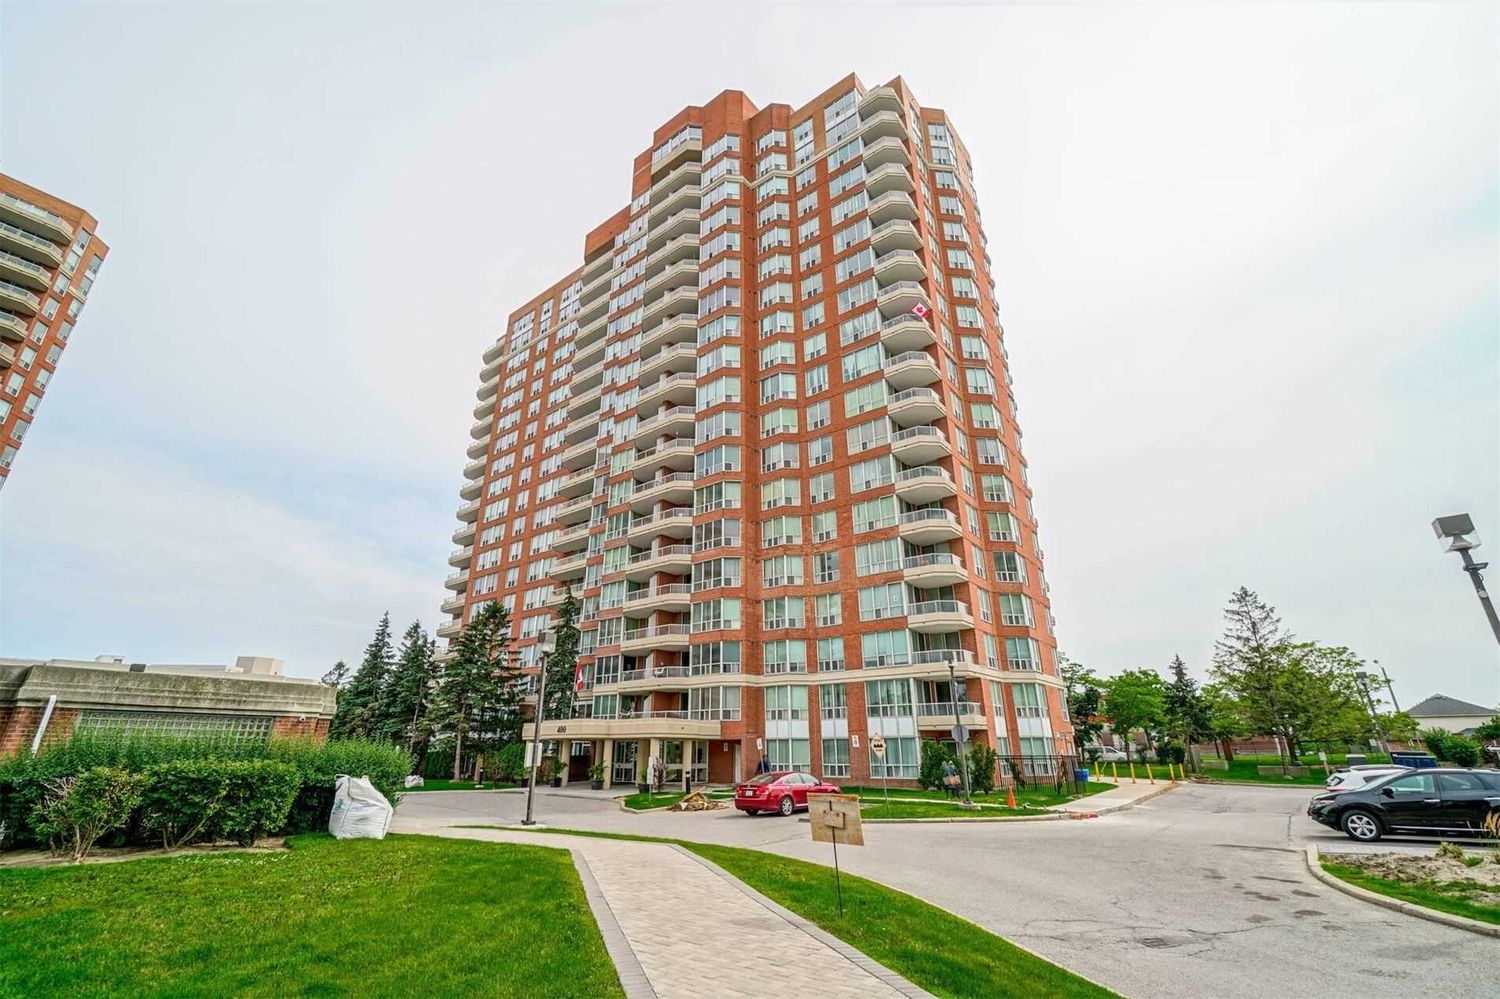 400 Mclevin Avenue. Mayfair on the Green I Condos is located in  Scarborough, Toronto - image #1 of 3